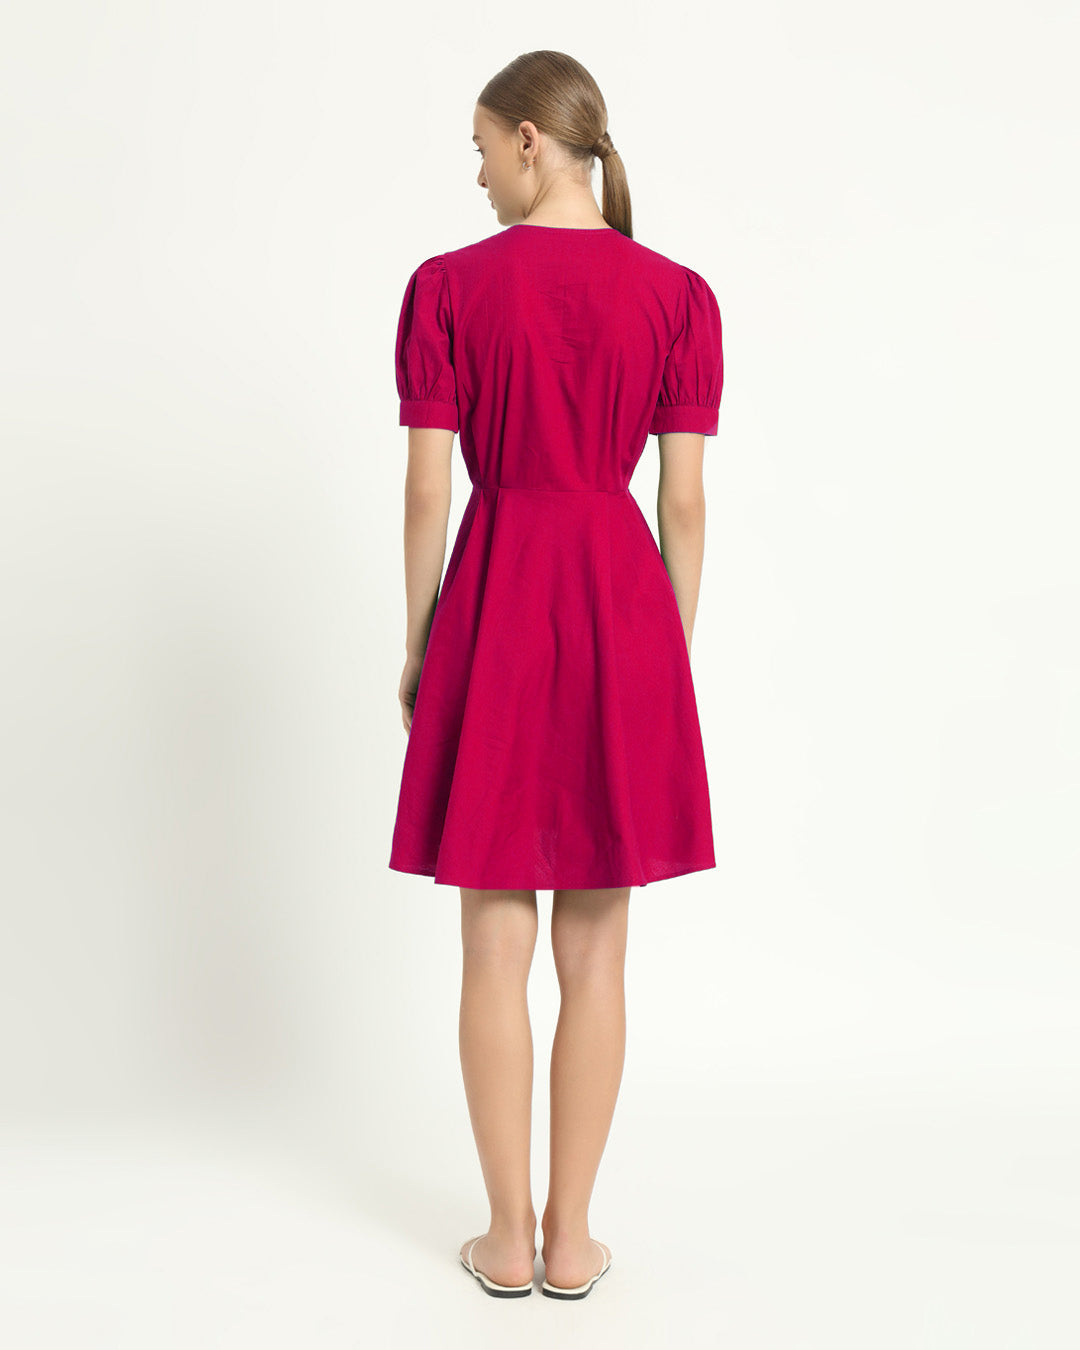 The Kittsee Berry Cotton Dress